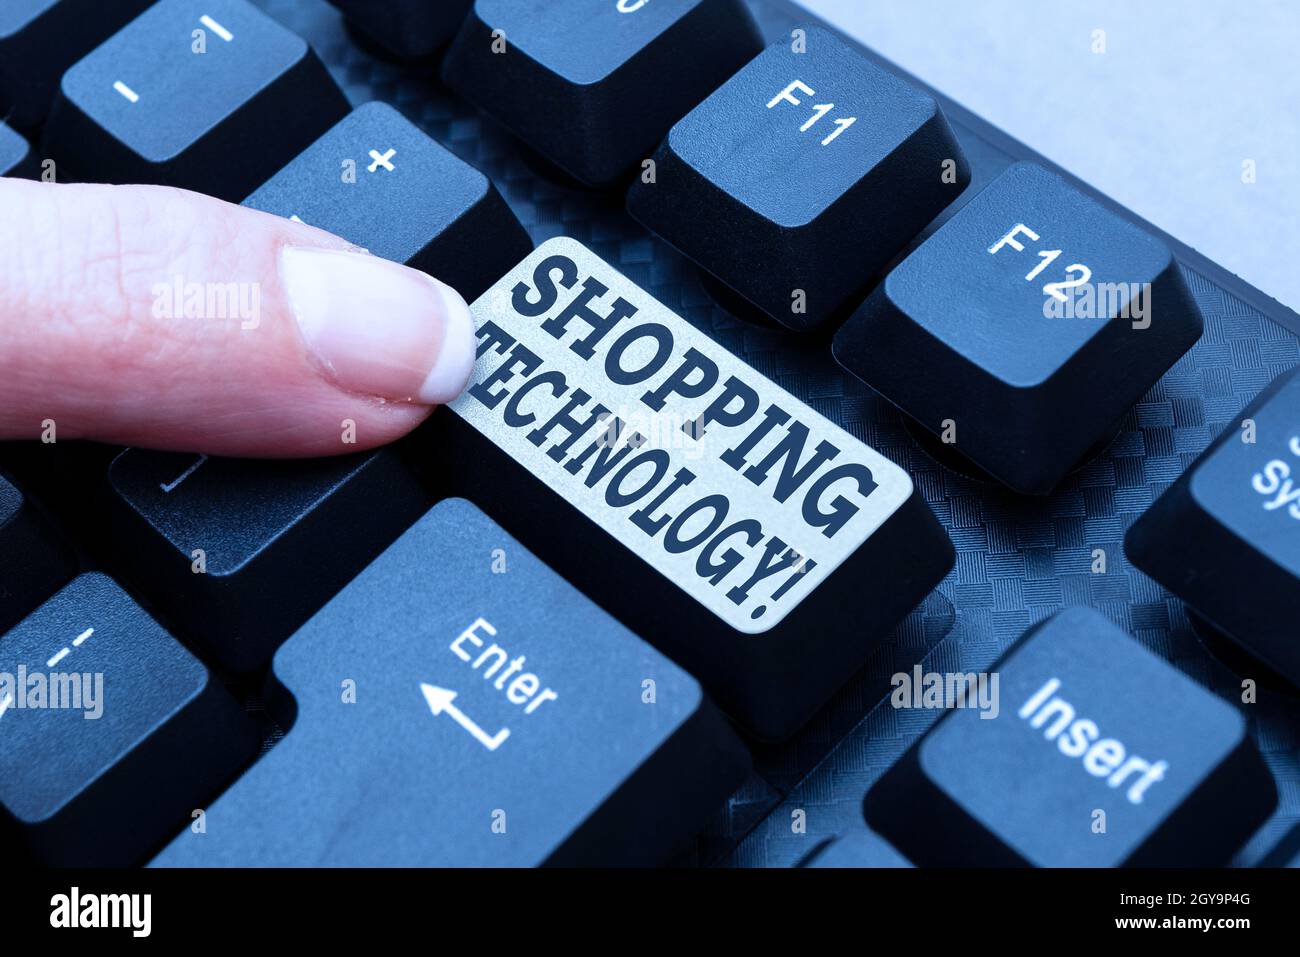 Text sign showing Shopping Technology, Business concept advancing innovations in trading and process automation Typing New Blog Contents, Writing Movi Stock Photo